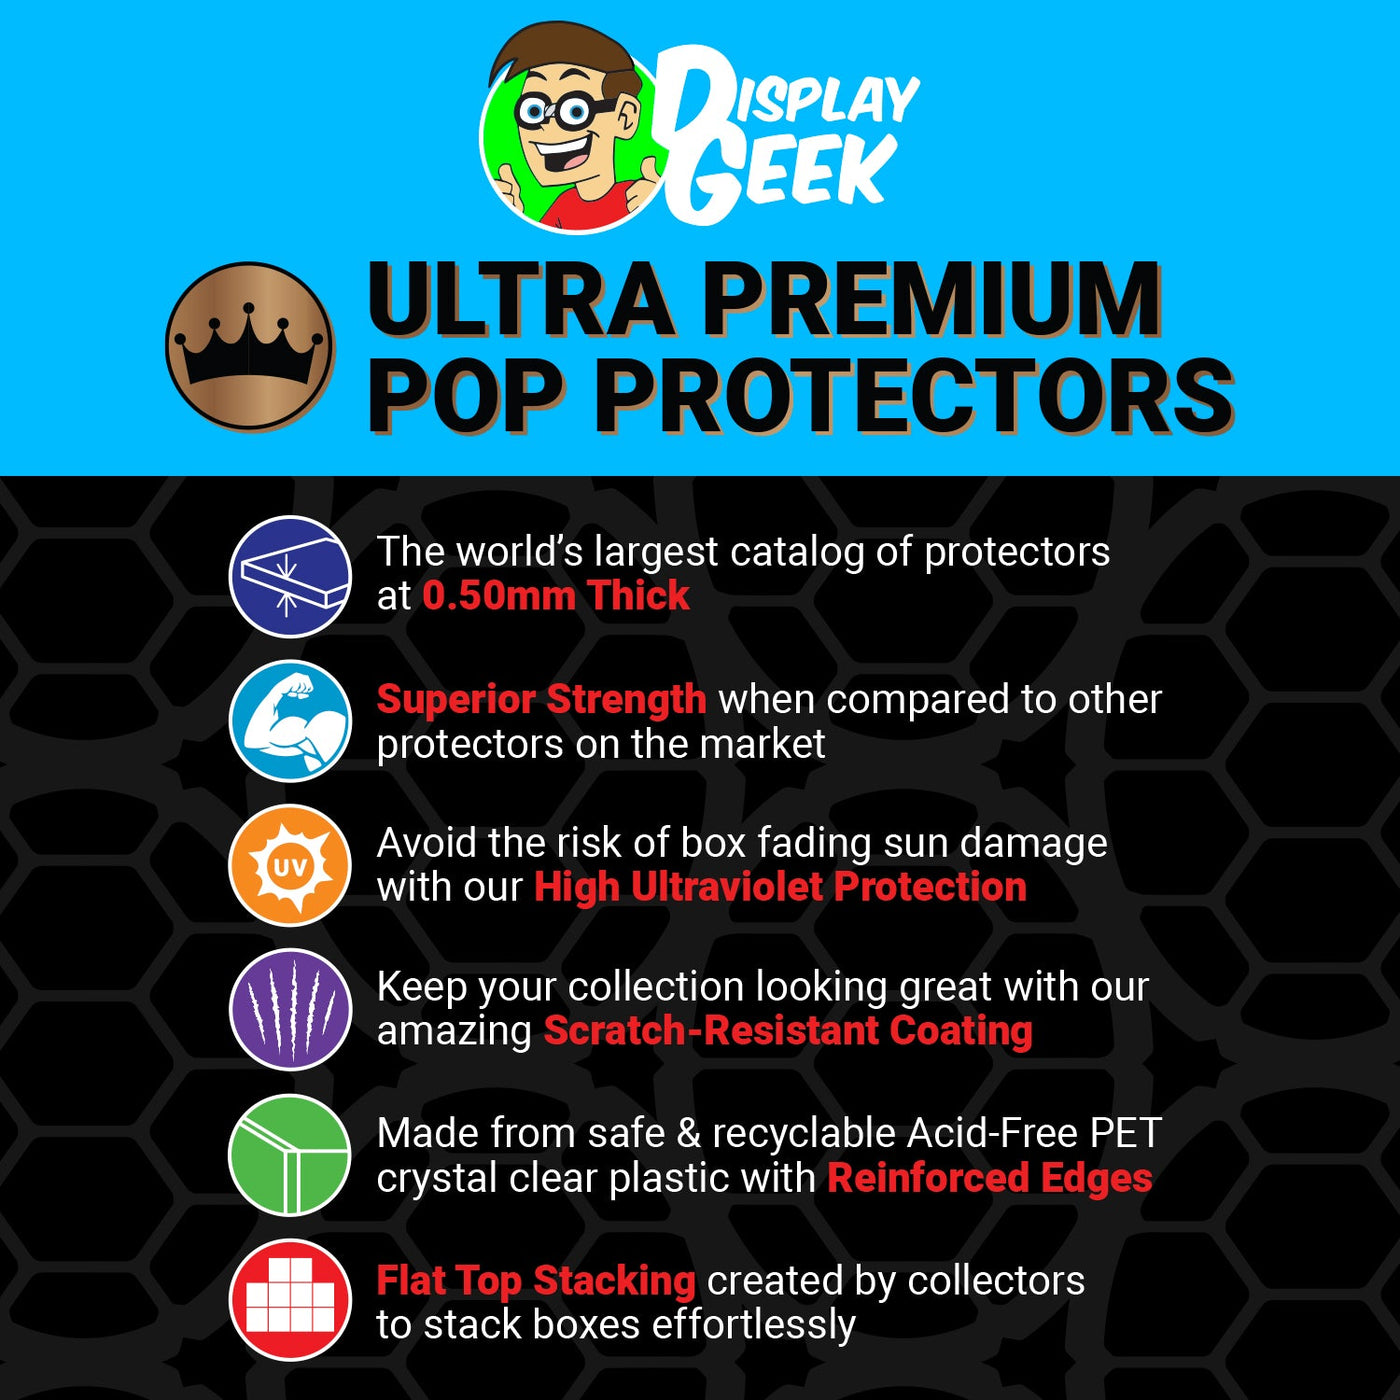 Pop Protector for Dr. Sattler with Triceratops #1198 Funko Pop Moment on The Protector Guide App by Display Geek